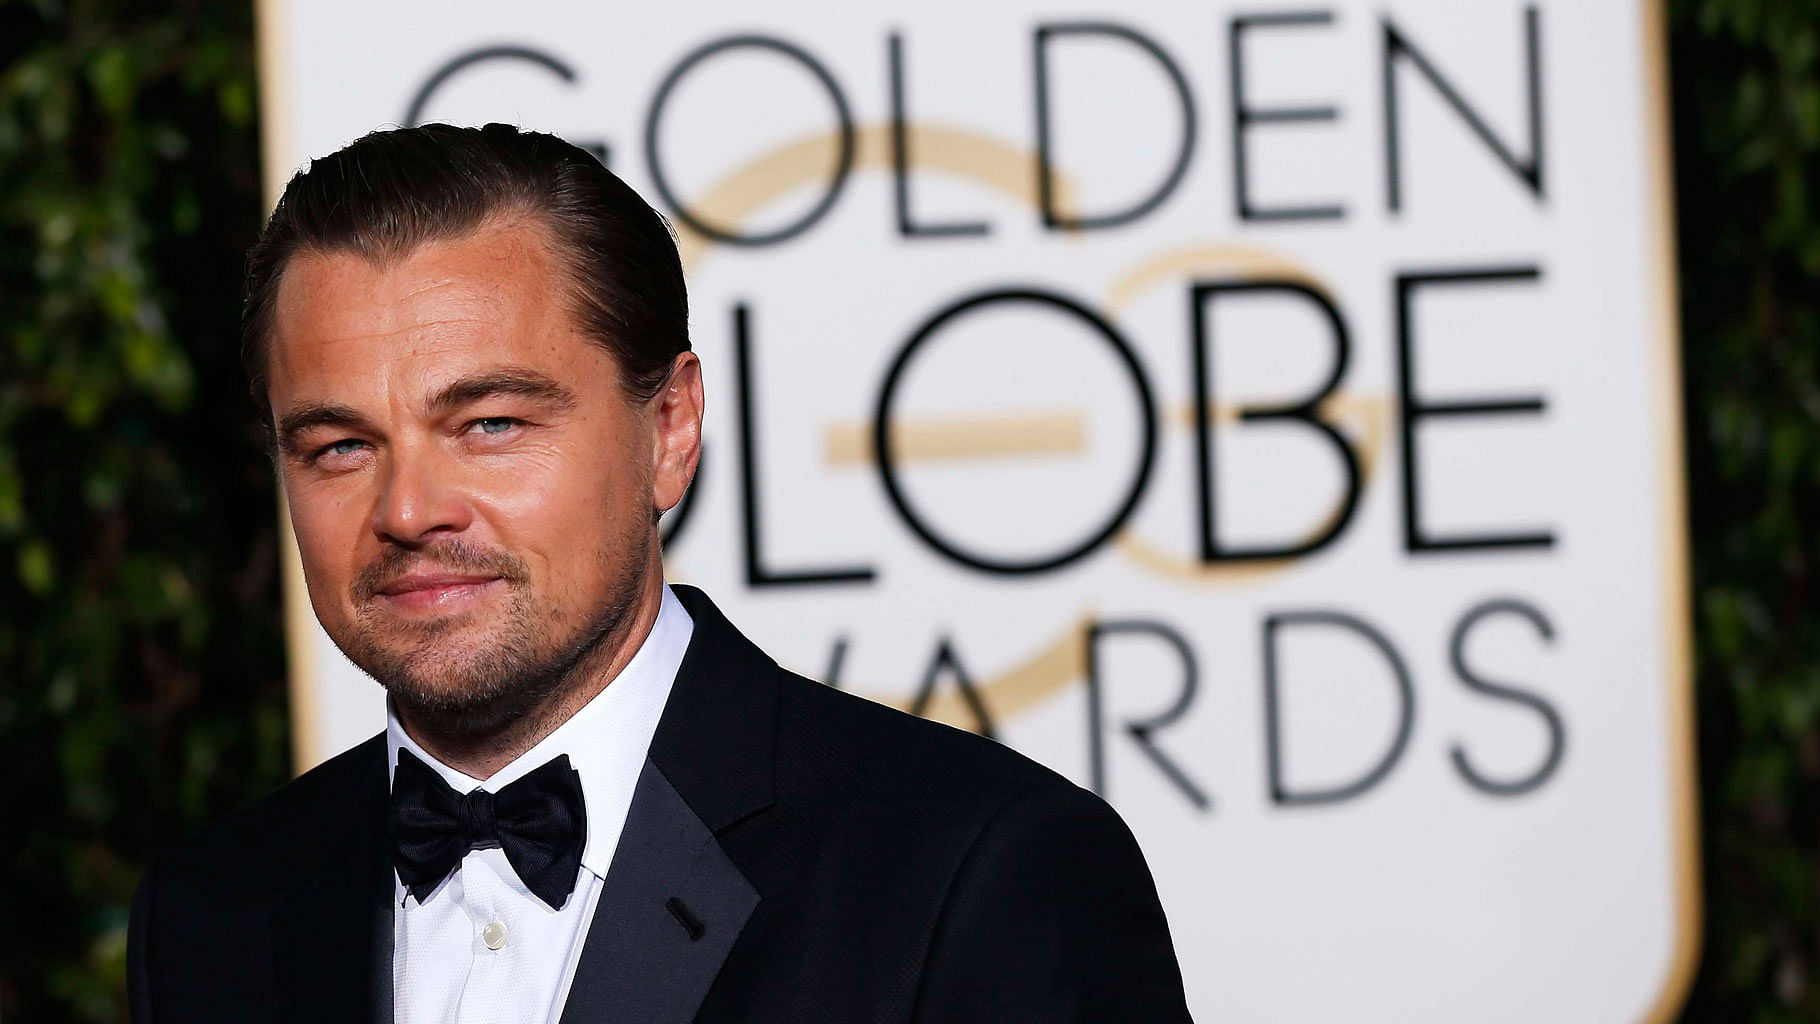 Actor Leonardo DiCaprio arrives at the 73rd Golden Globe Awards in Beverly Hills, California (Photo: Reuters)